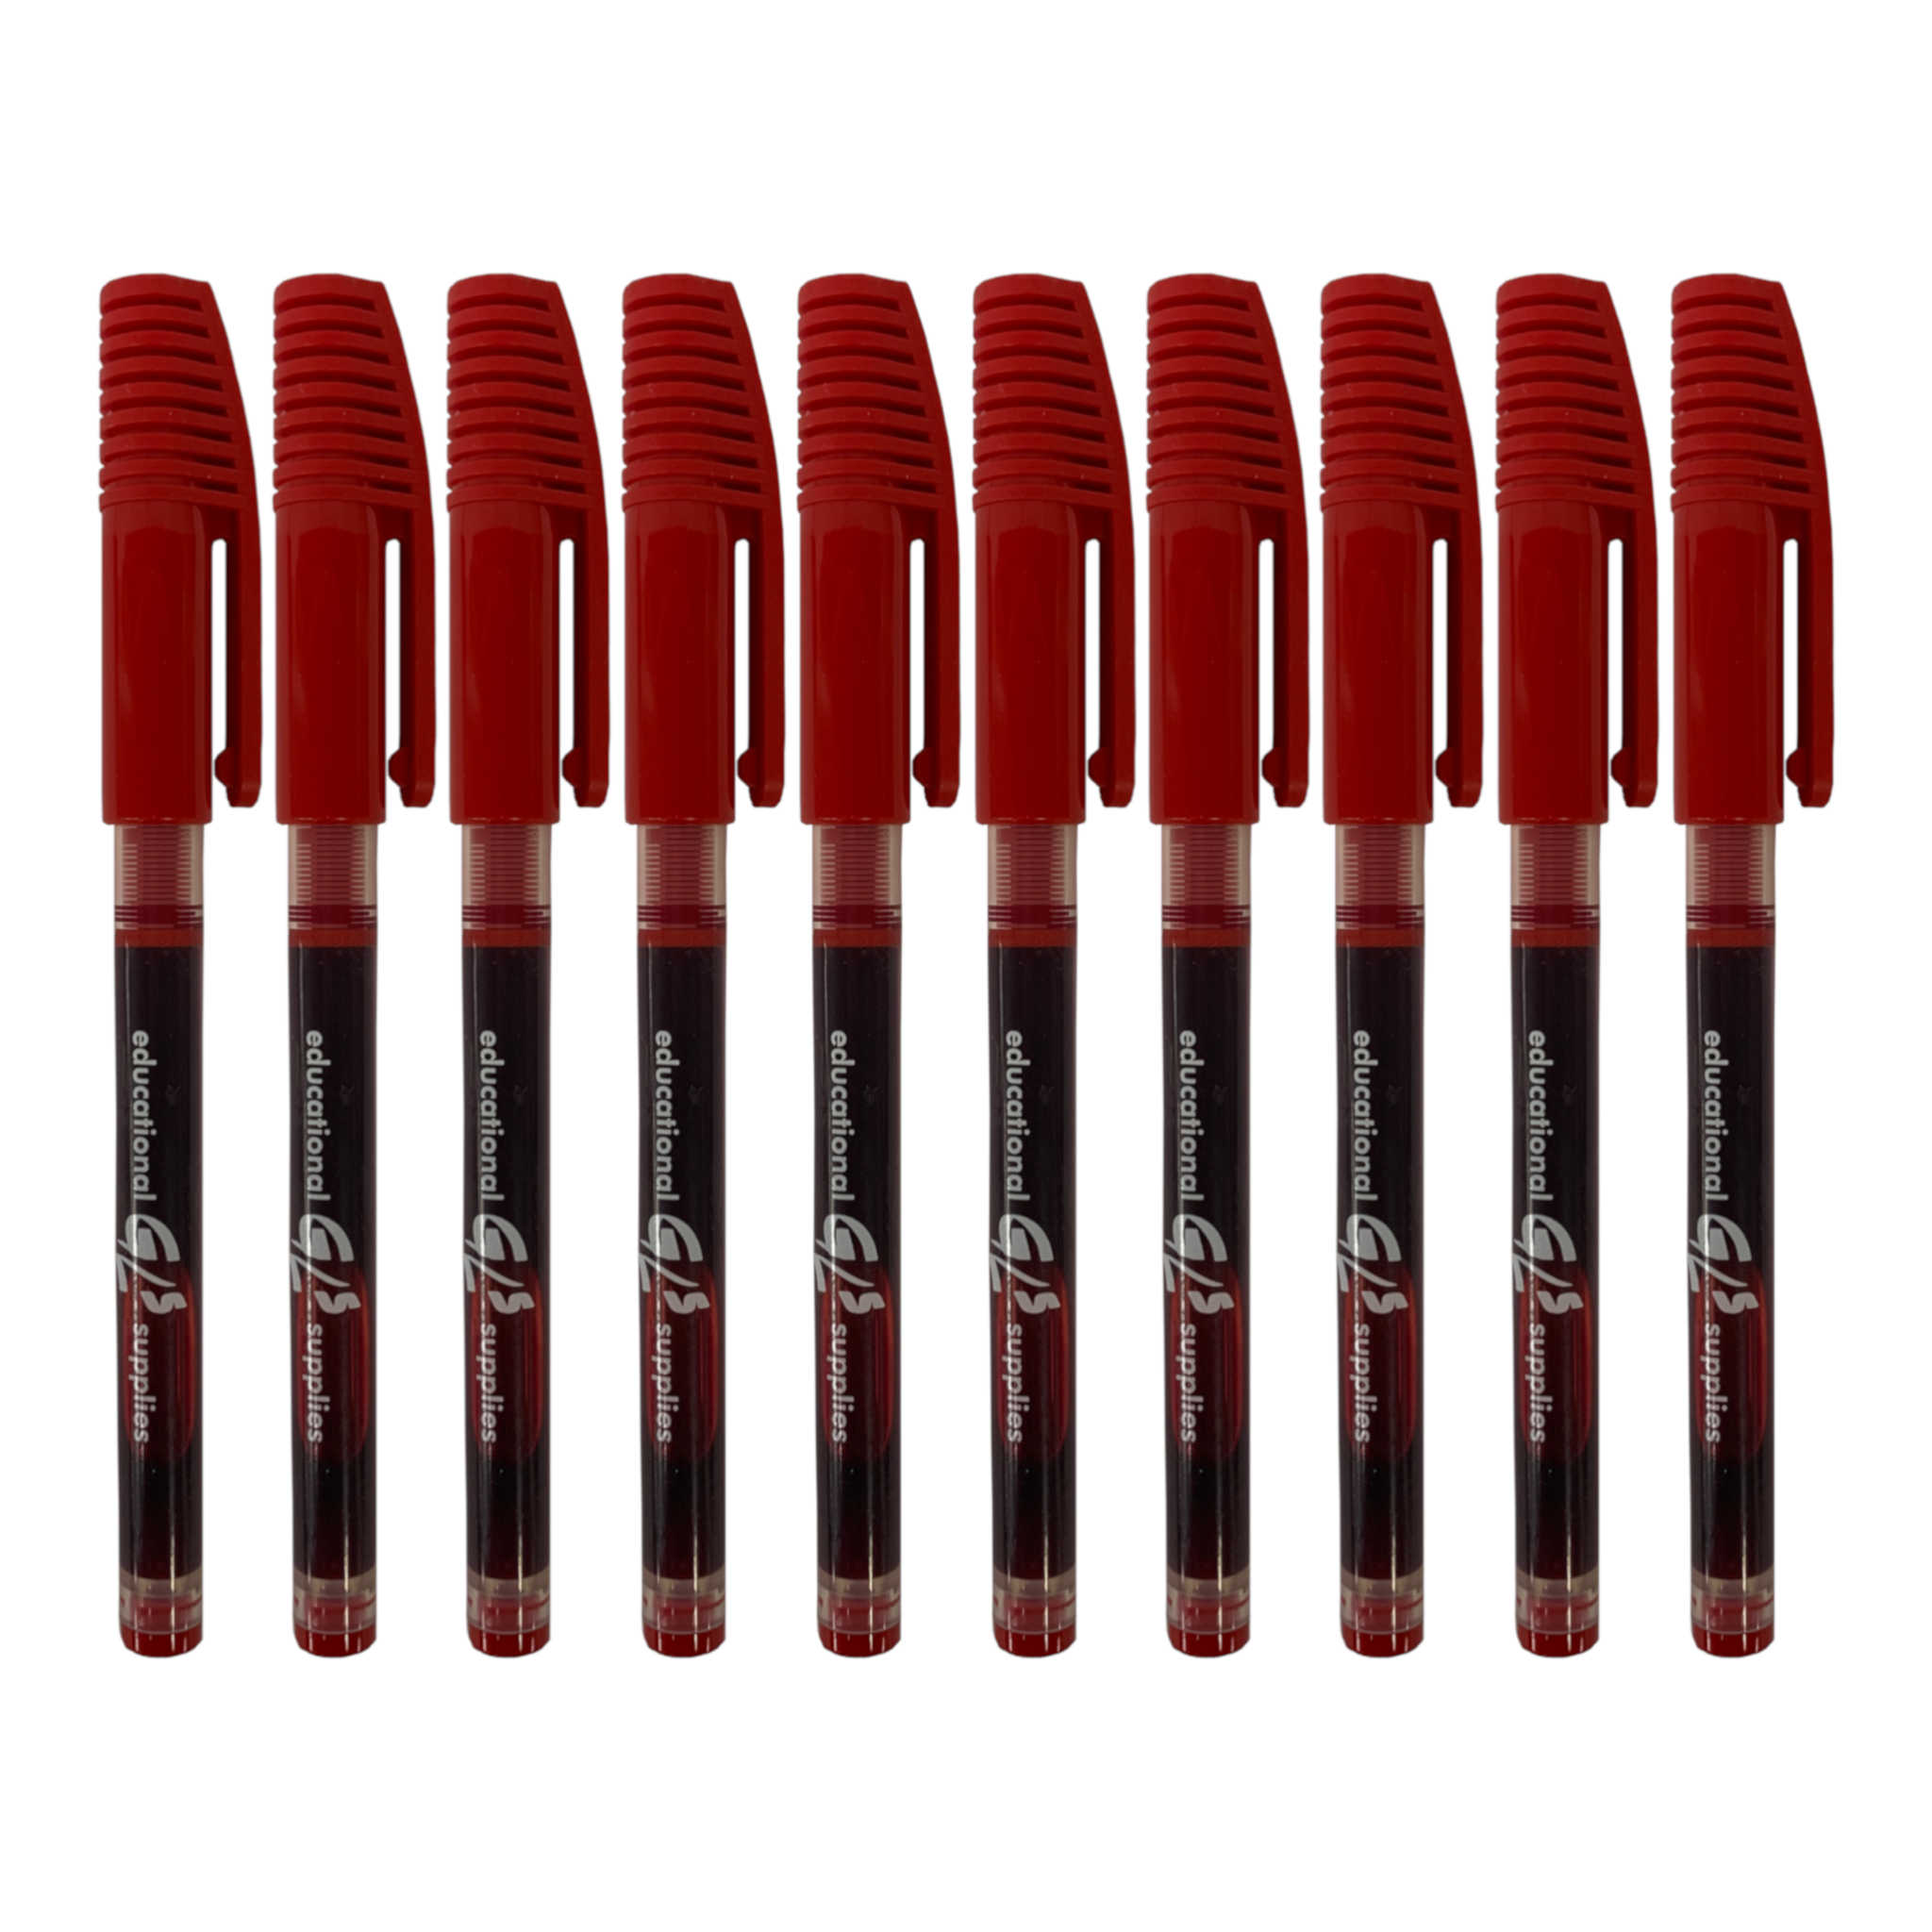 Liquid Rollerball Pens | Red | 10 Pack